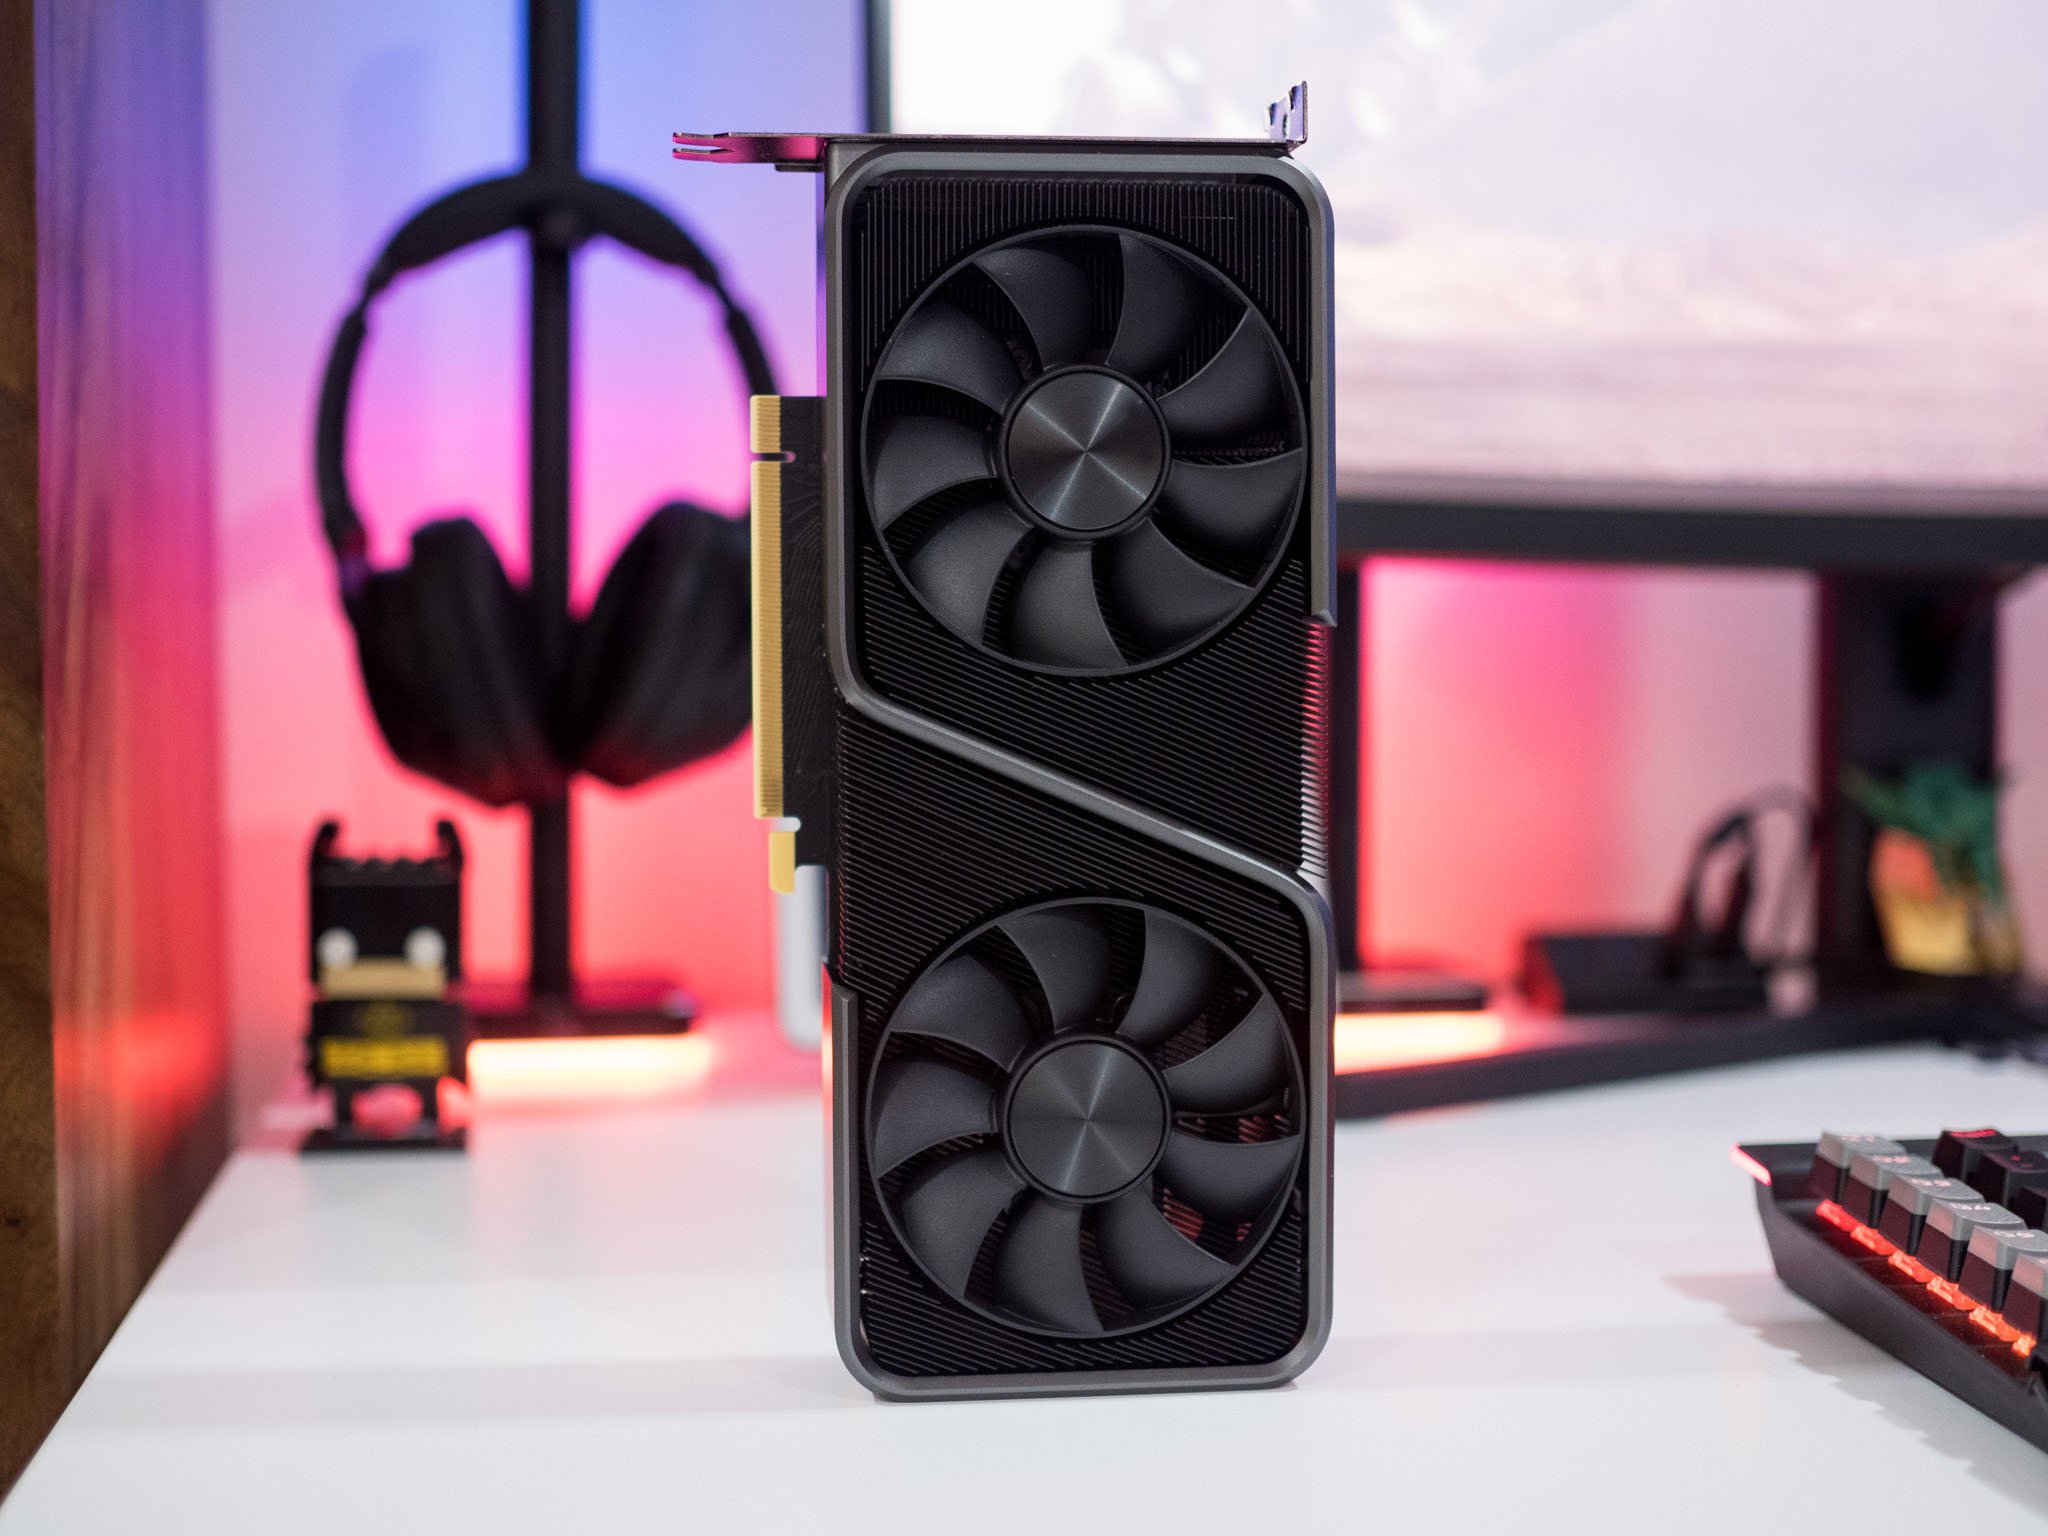 NVIDIA GeForce RTX 3070 review: The ideal upgrade for most PC gamers